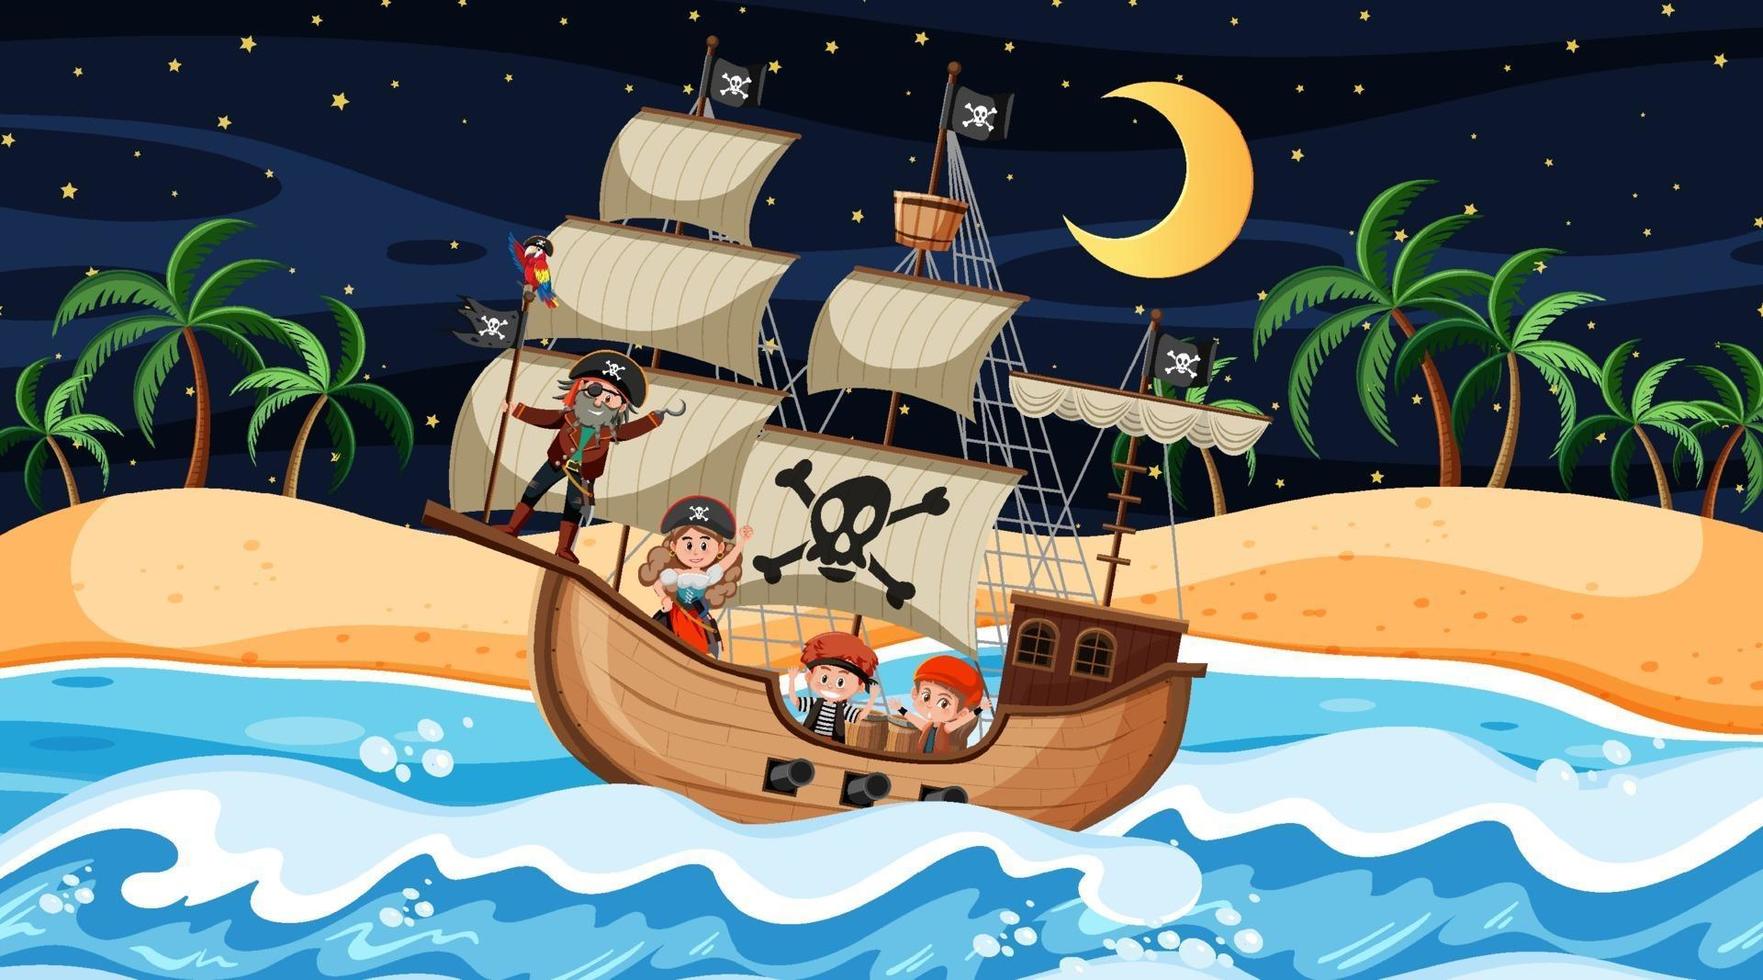 Beach with Pirate ship at night scene in cartoon style vector